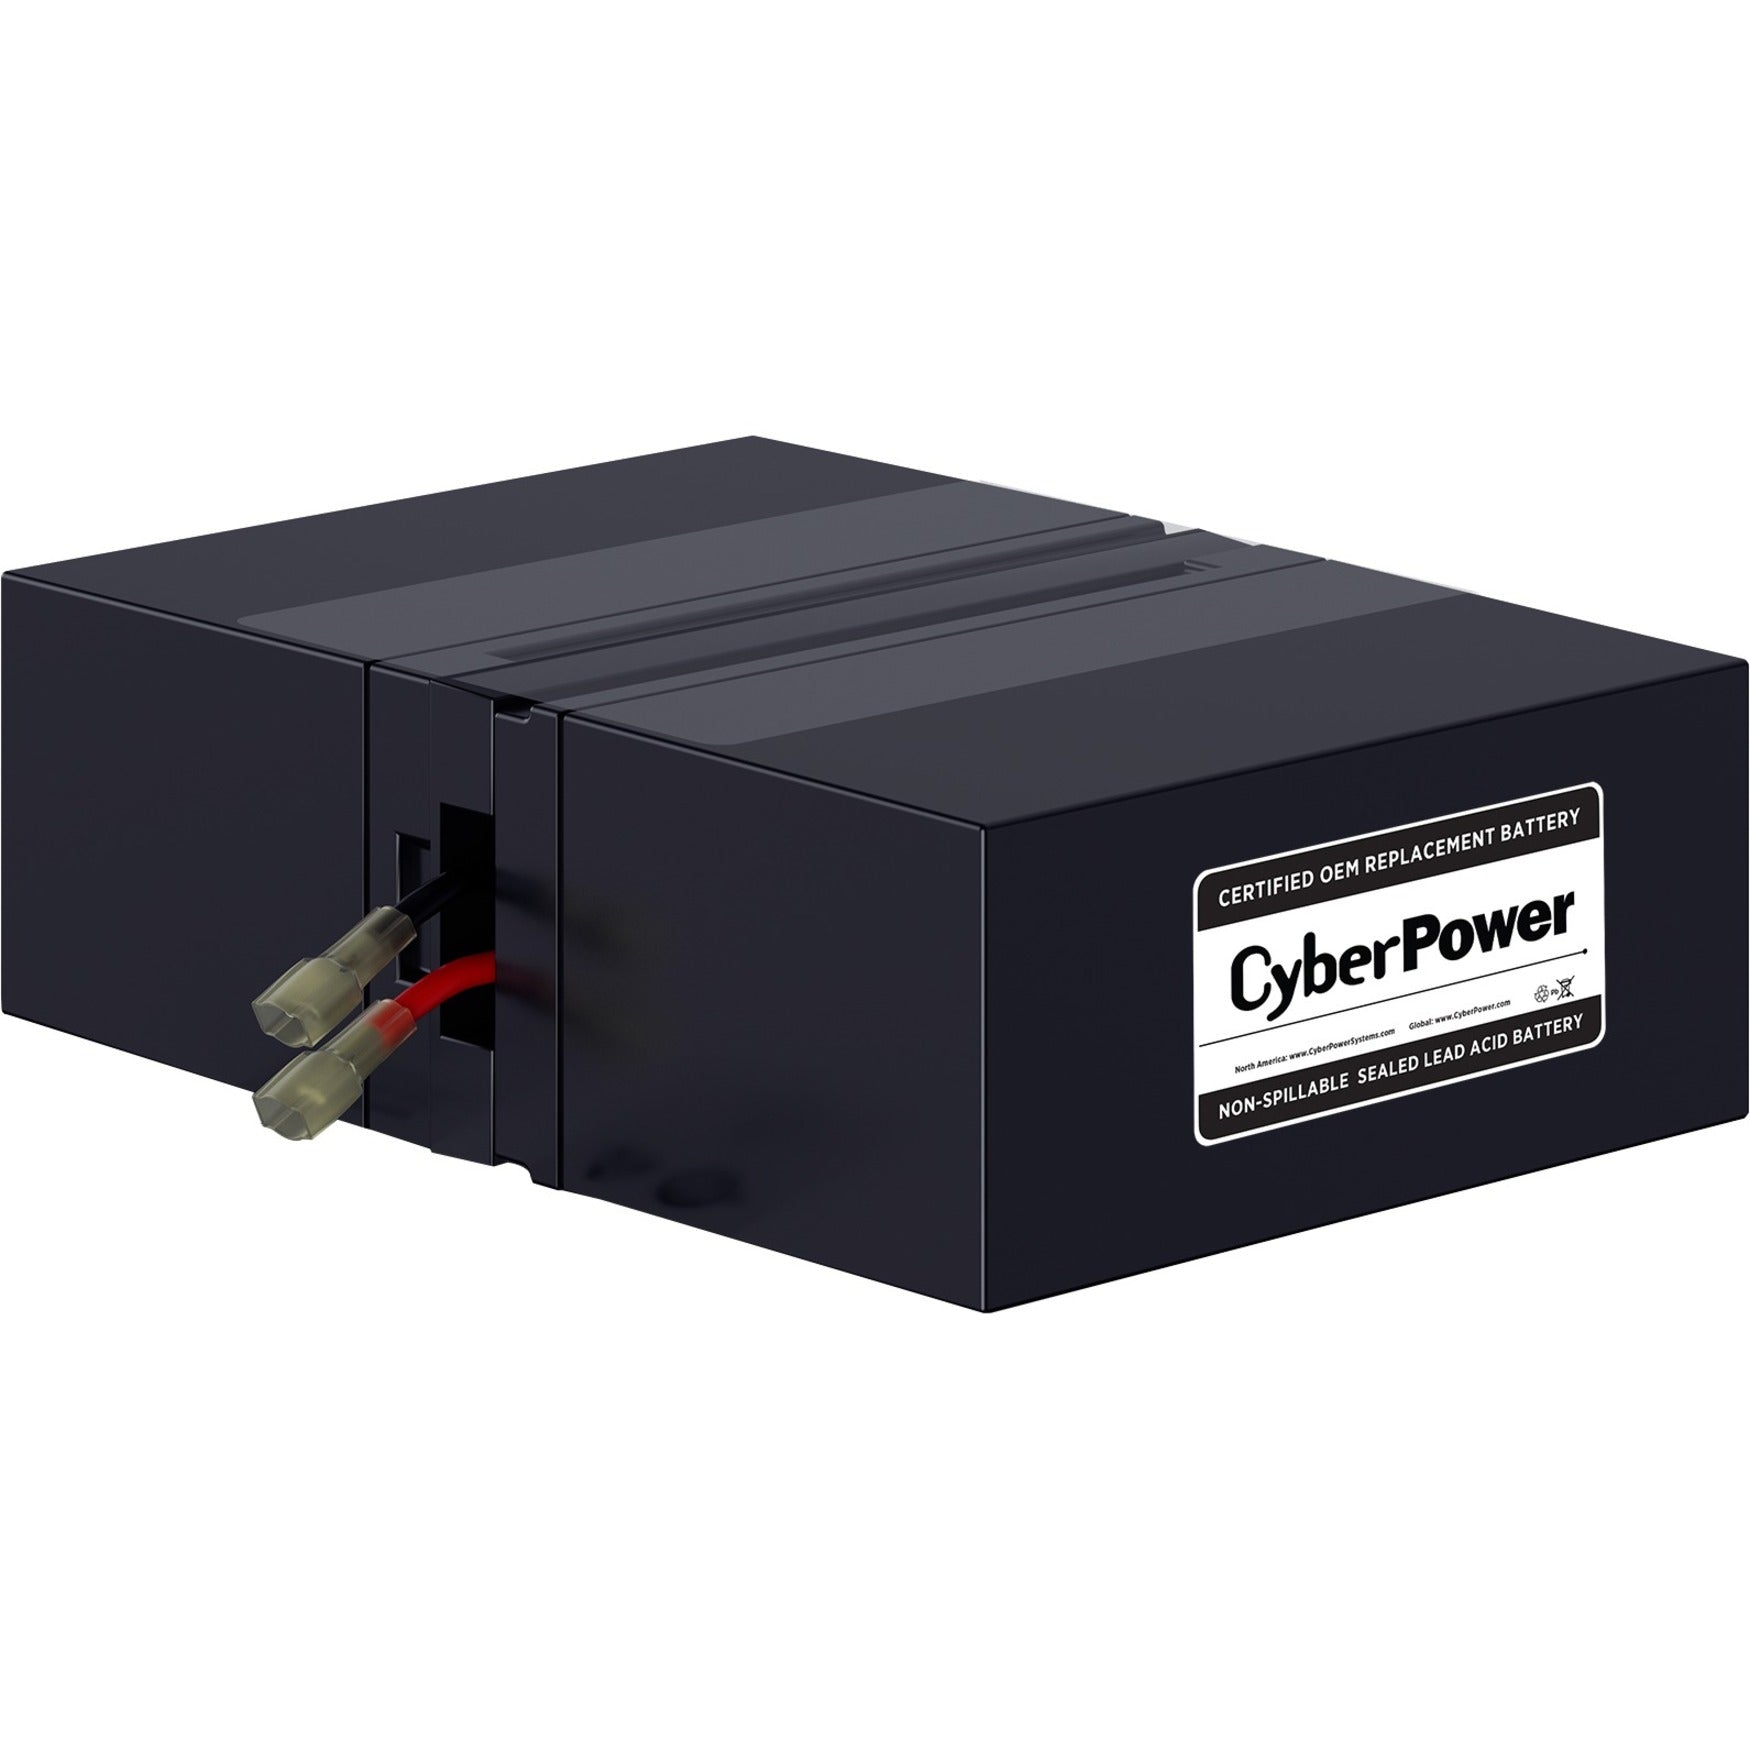 CyberPower RB1280X2A UPS Replacement Battery Cartridge, 18 Month Warranty, 12V DC, 8000mAh, Lead Acid, Maintenance-free